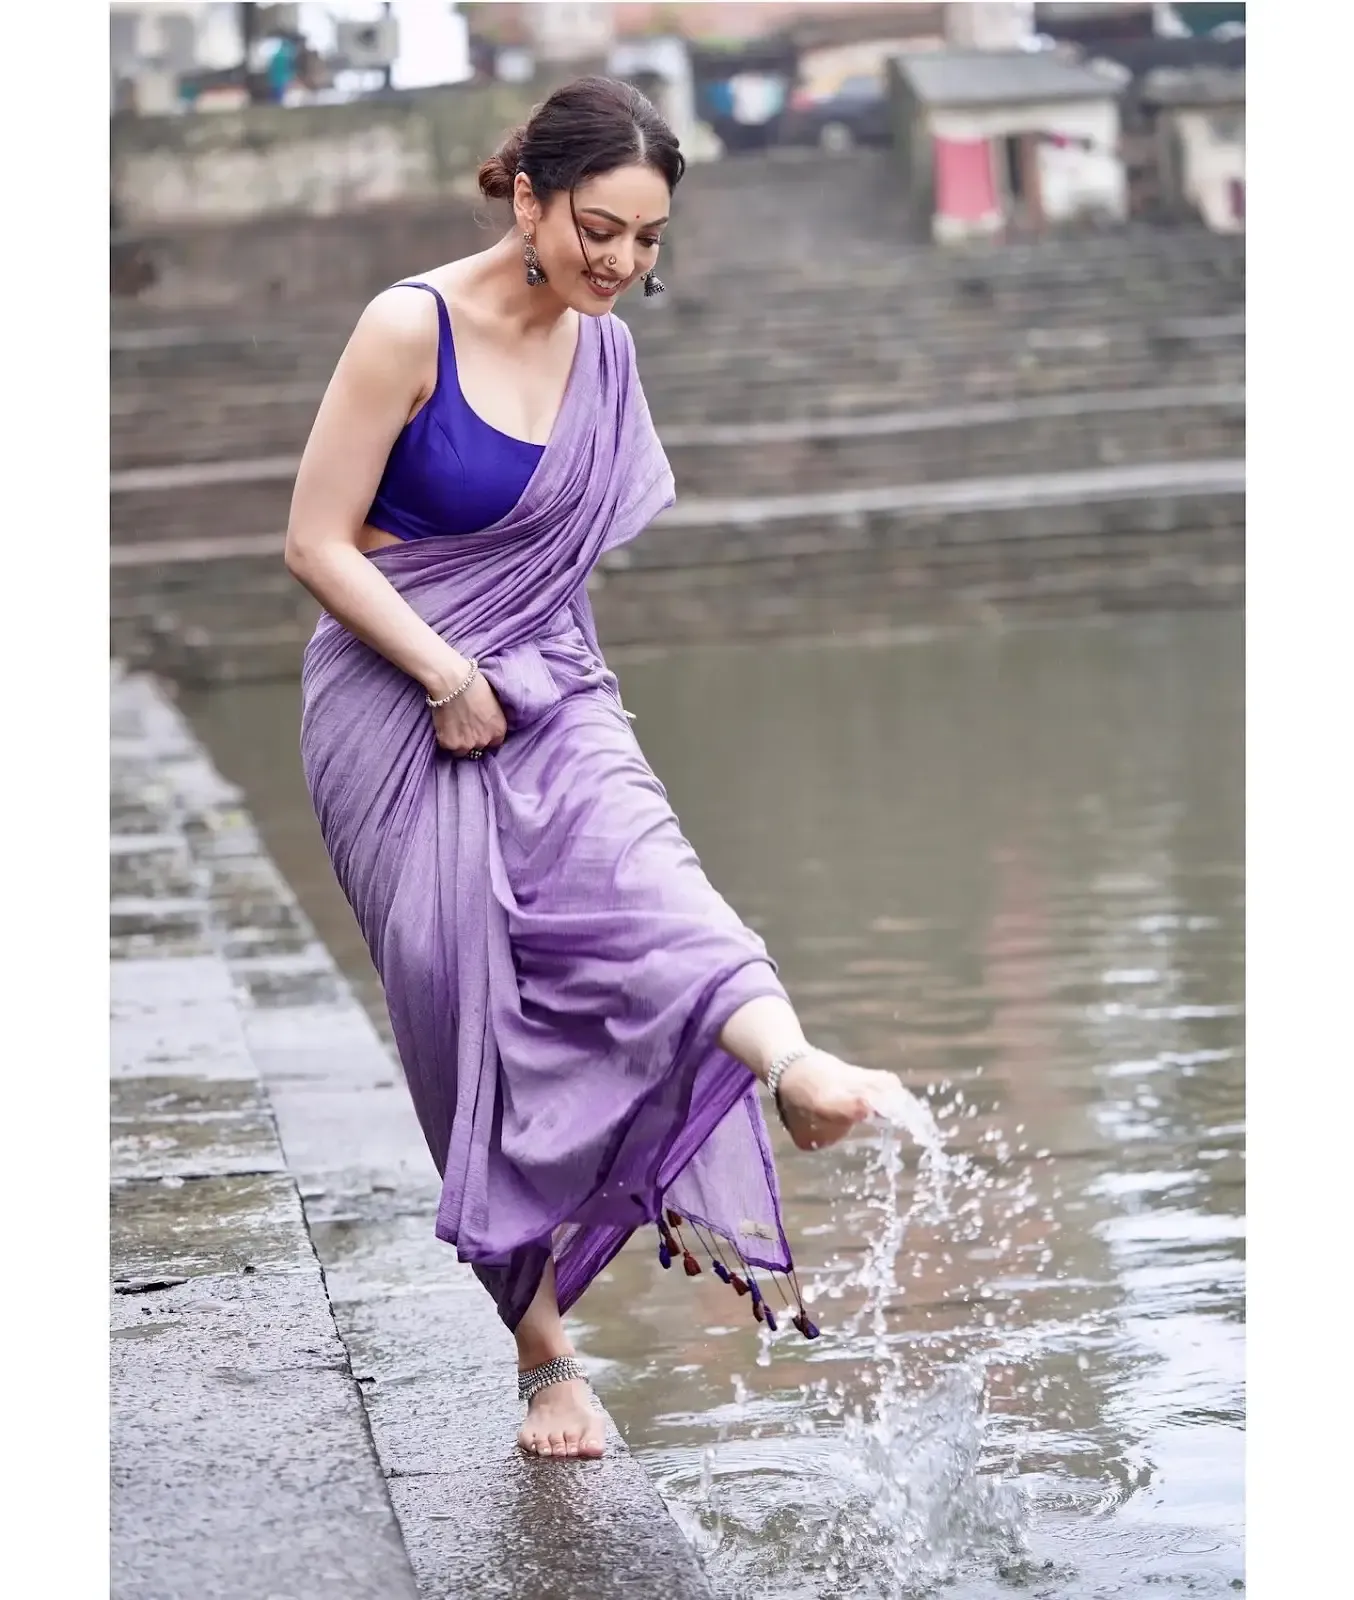 NORTH INDIAN GIRL SANDEEPA DHAR IMAGES IN TRADITIONAL VIOLET SAREE 4